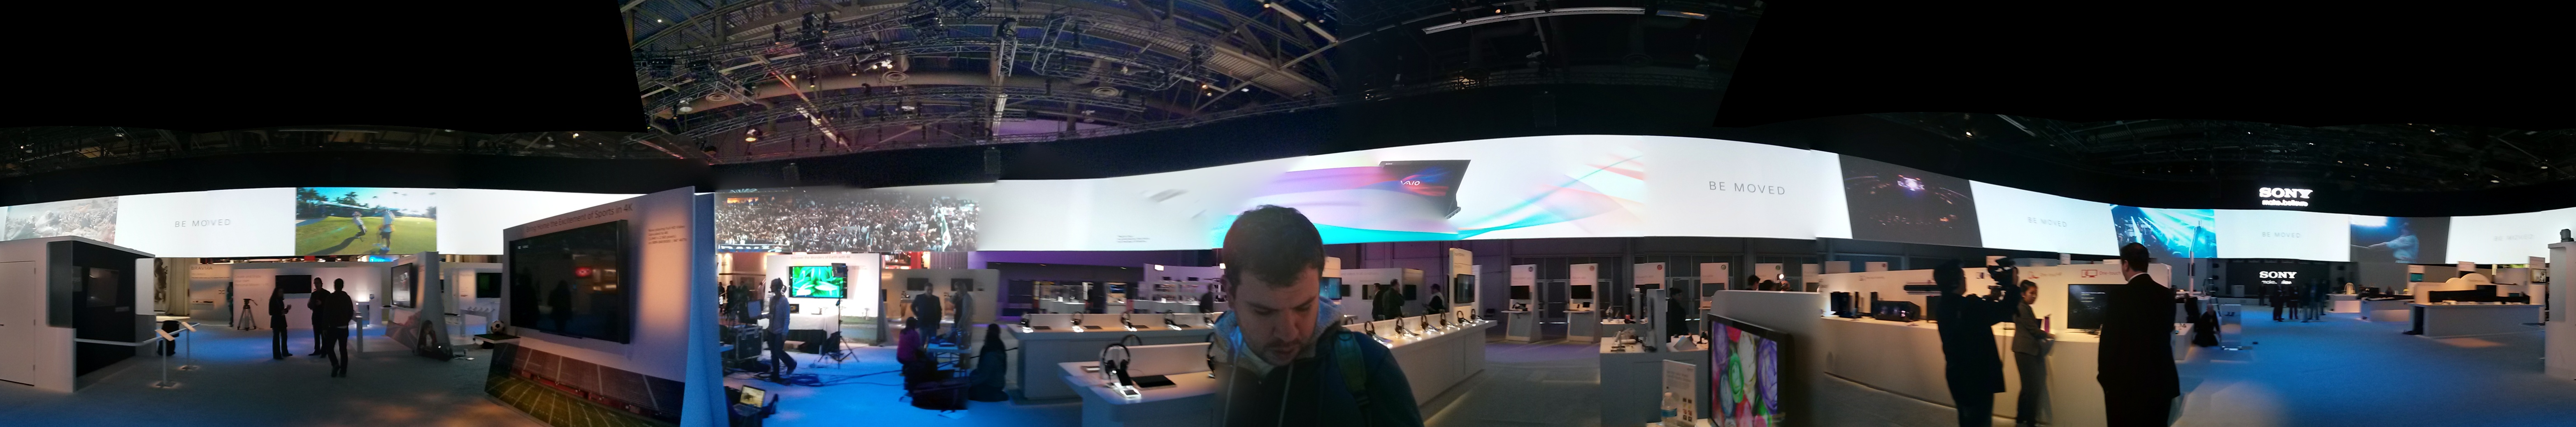 Sony-Booth-CES-2013